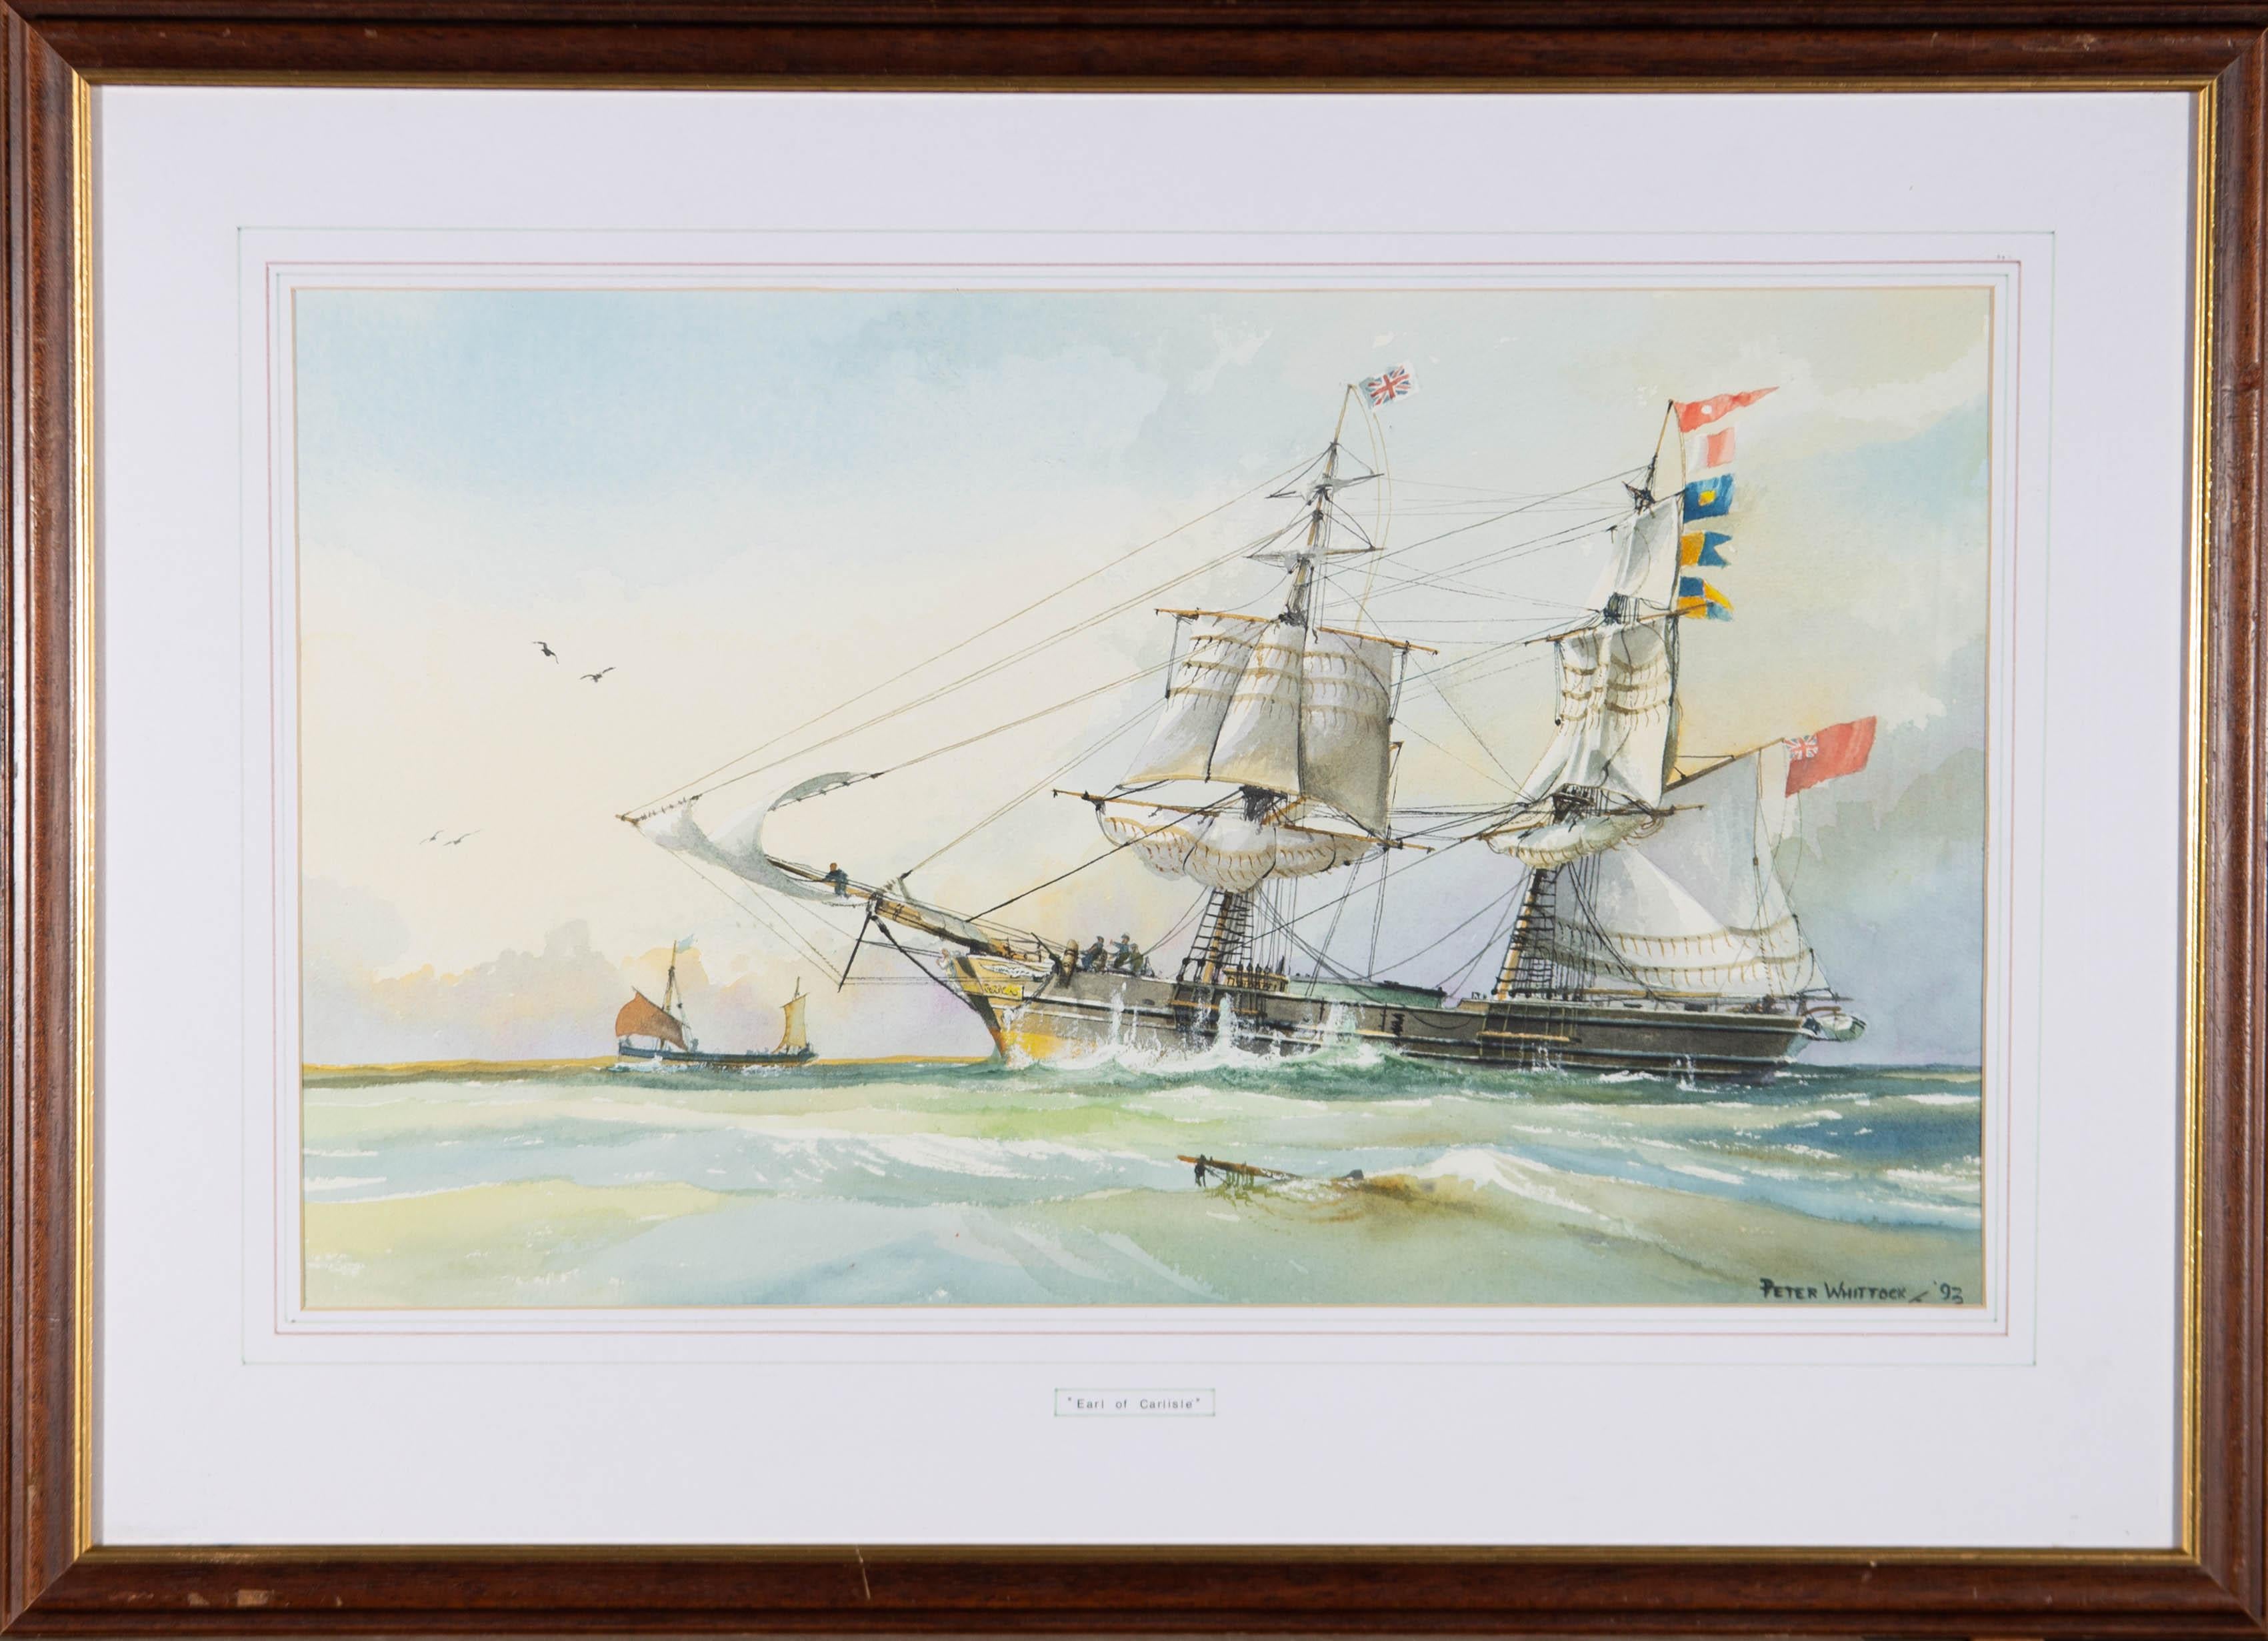 A watercolour painting of the 19th-century ship the Earl of Carlisle. Presented glazed in a wash line mount and a wooden frame with a gilt-effect inner edge. Signed and dated to the lower-right edge. The name of the ship is inscribed at the centre